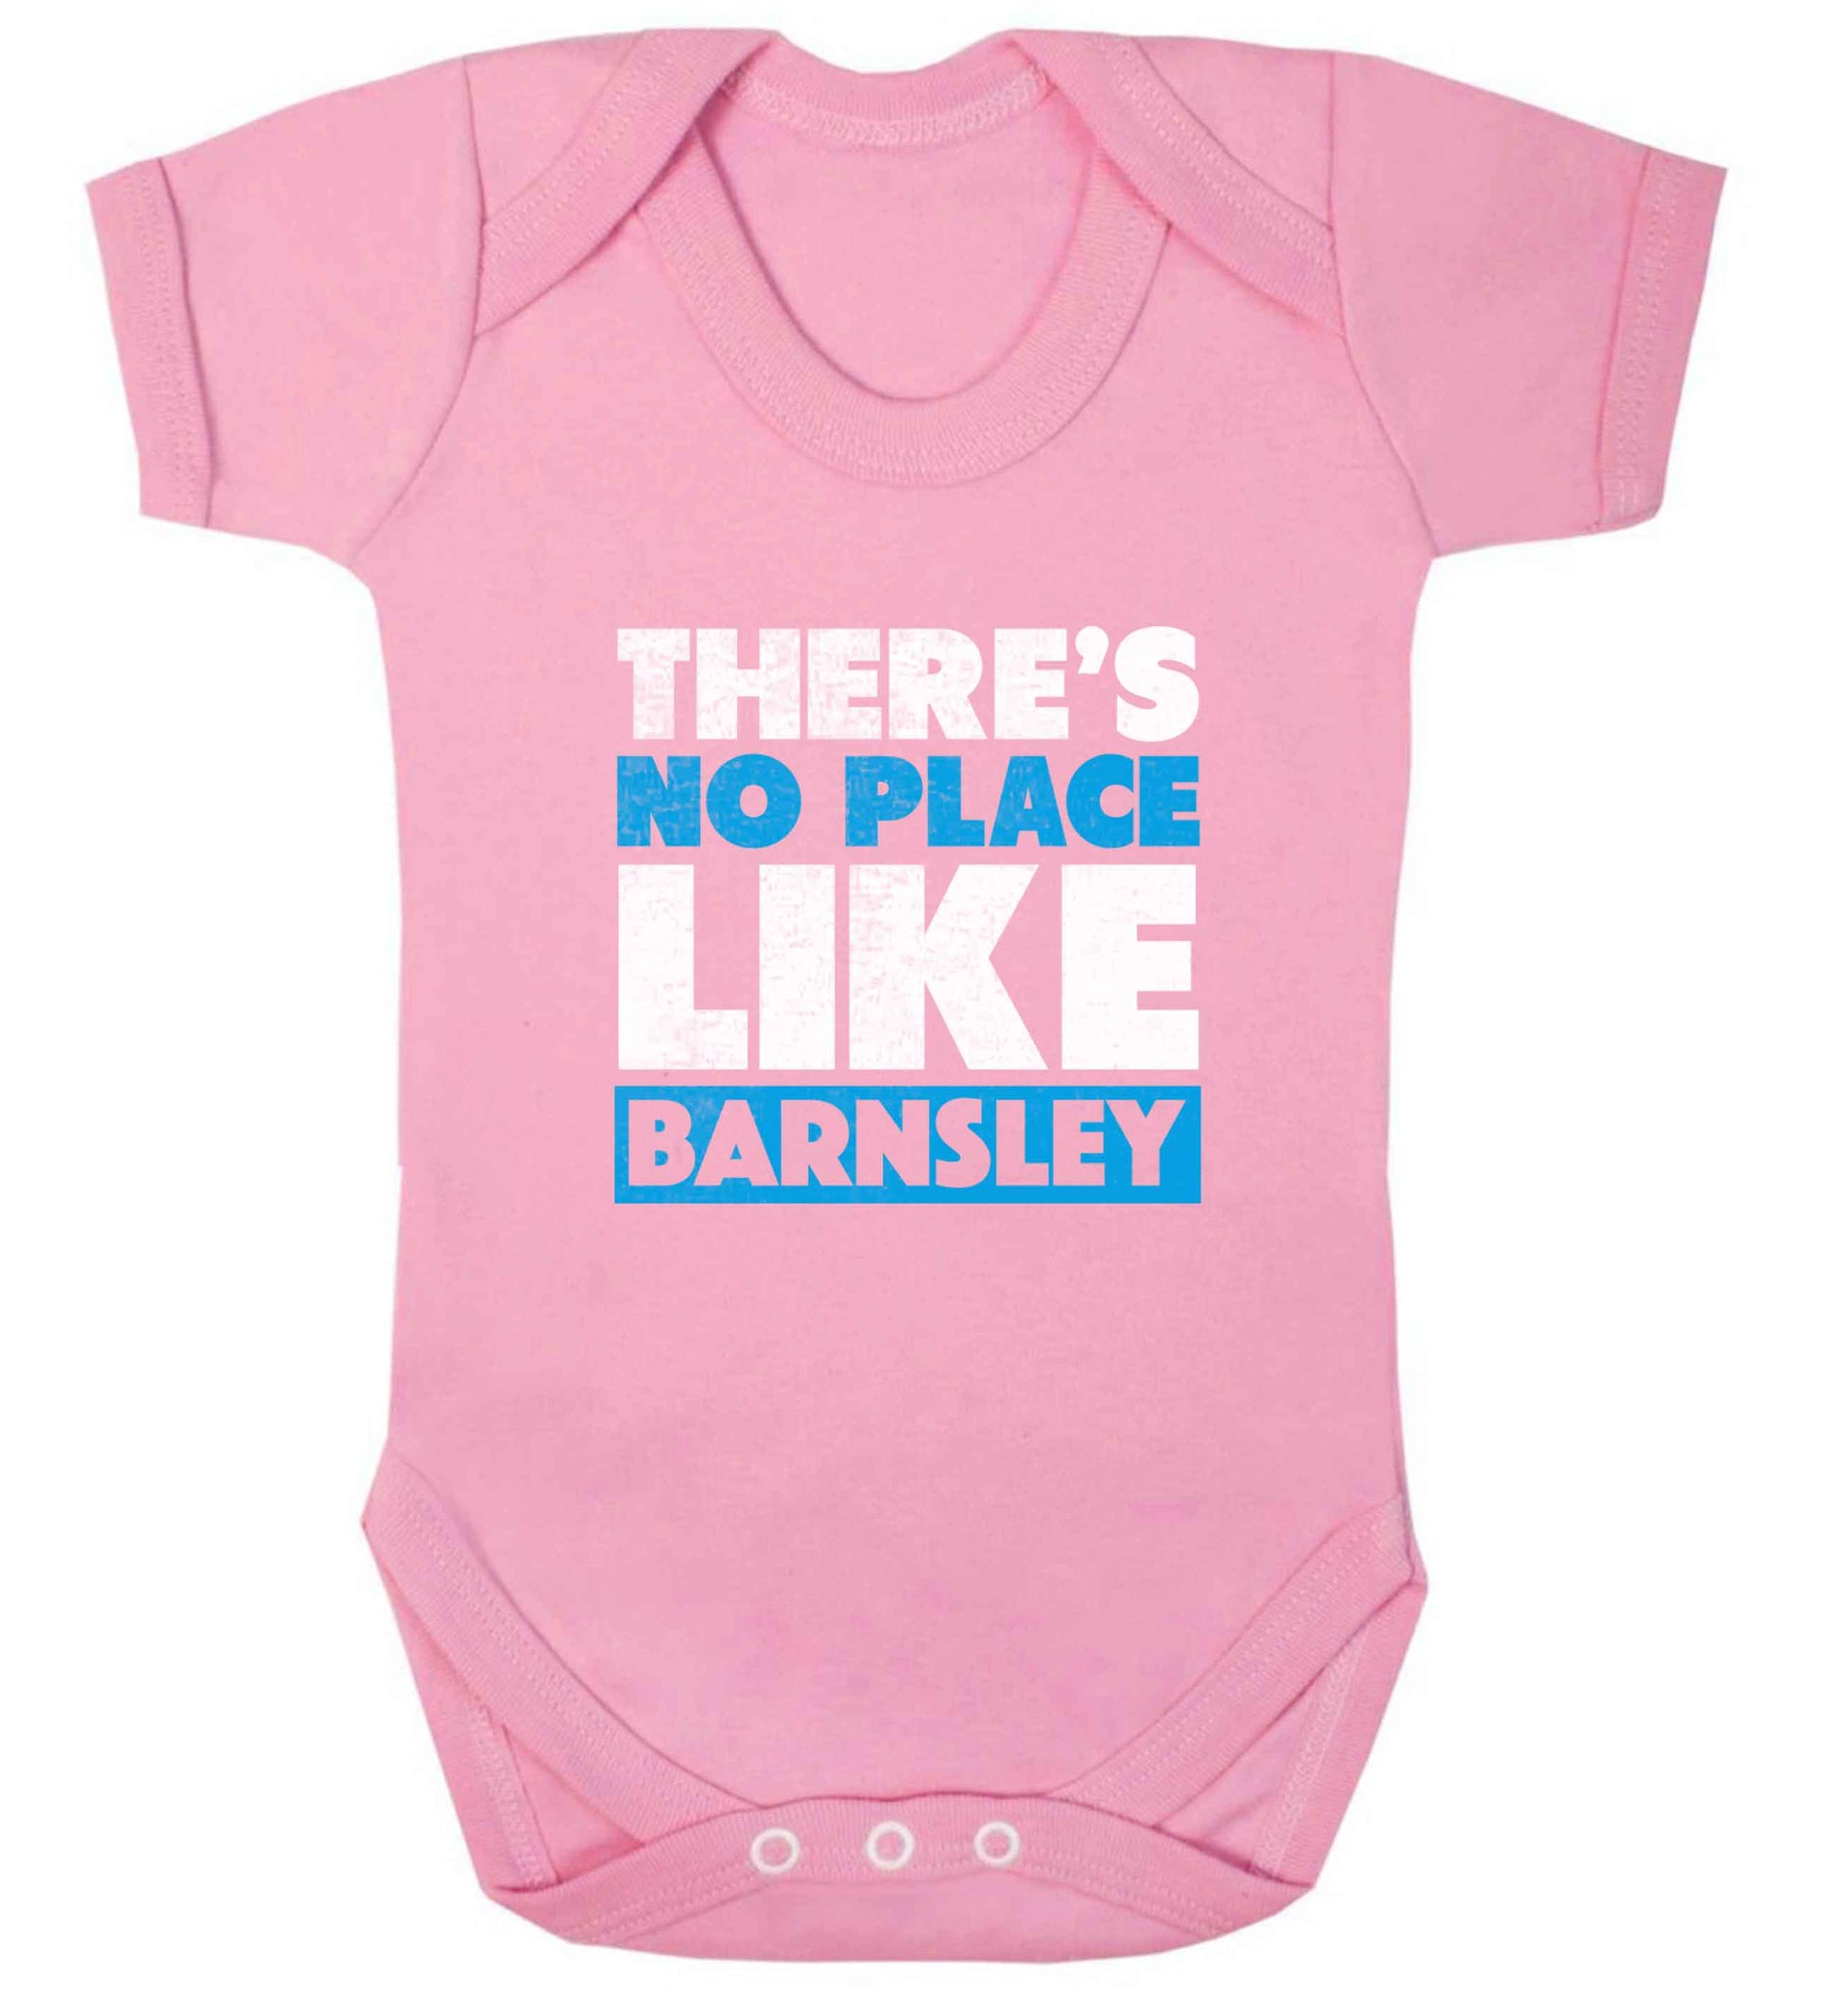 There's No Place Like Barnsley baby vest pale pink 18-24 months